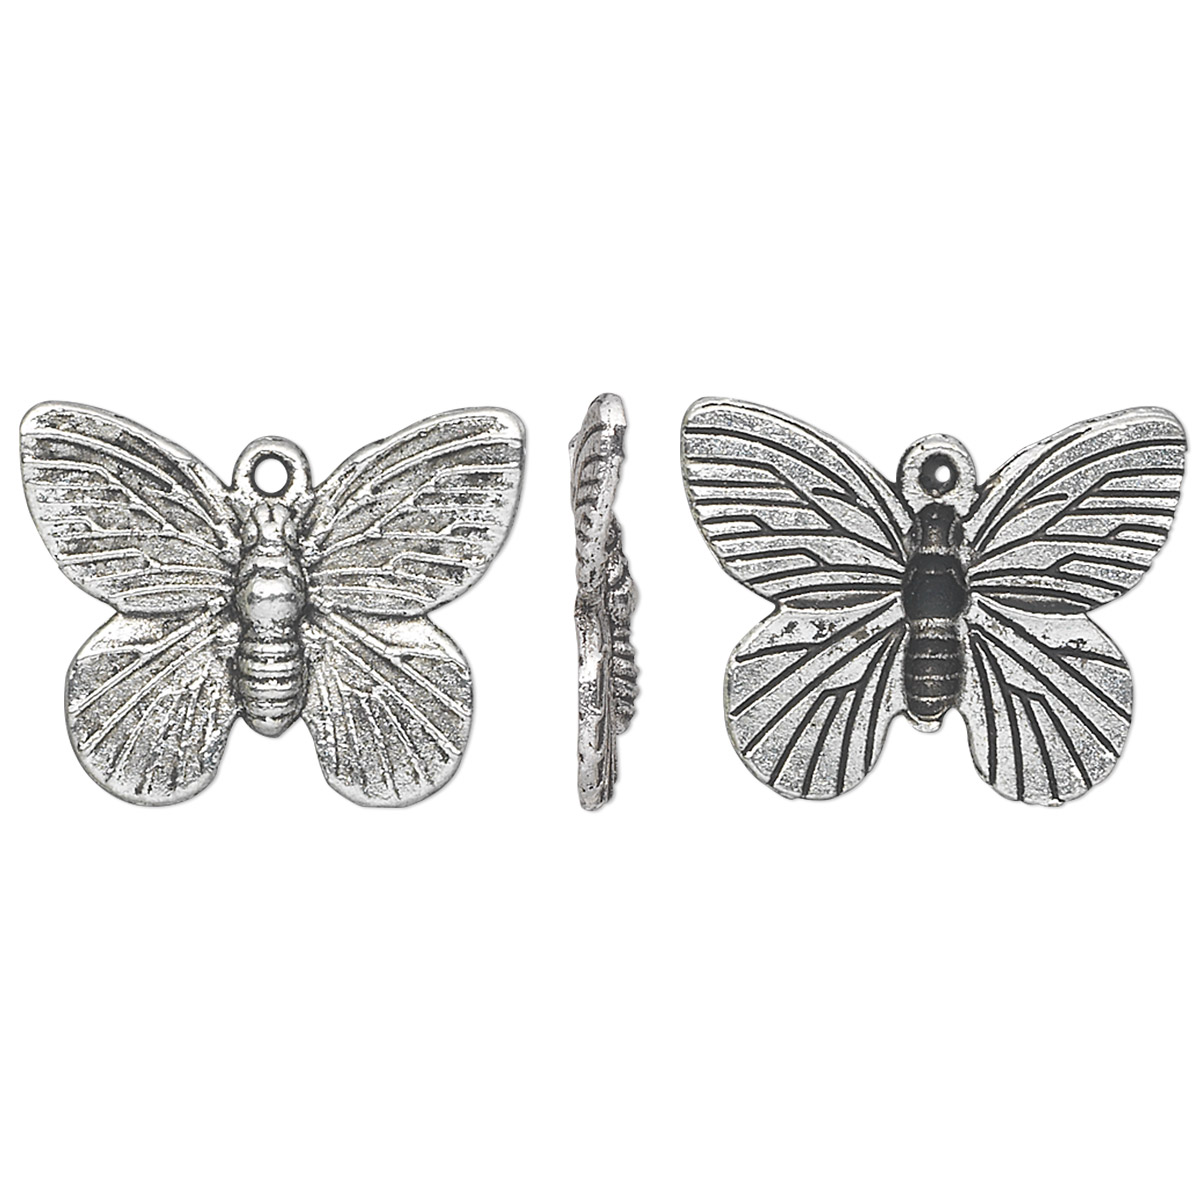 Charm, antique silver-plated "pewter" (zinc-based alloy), 18x14mm